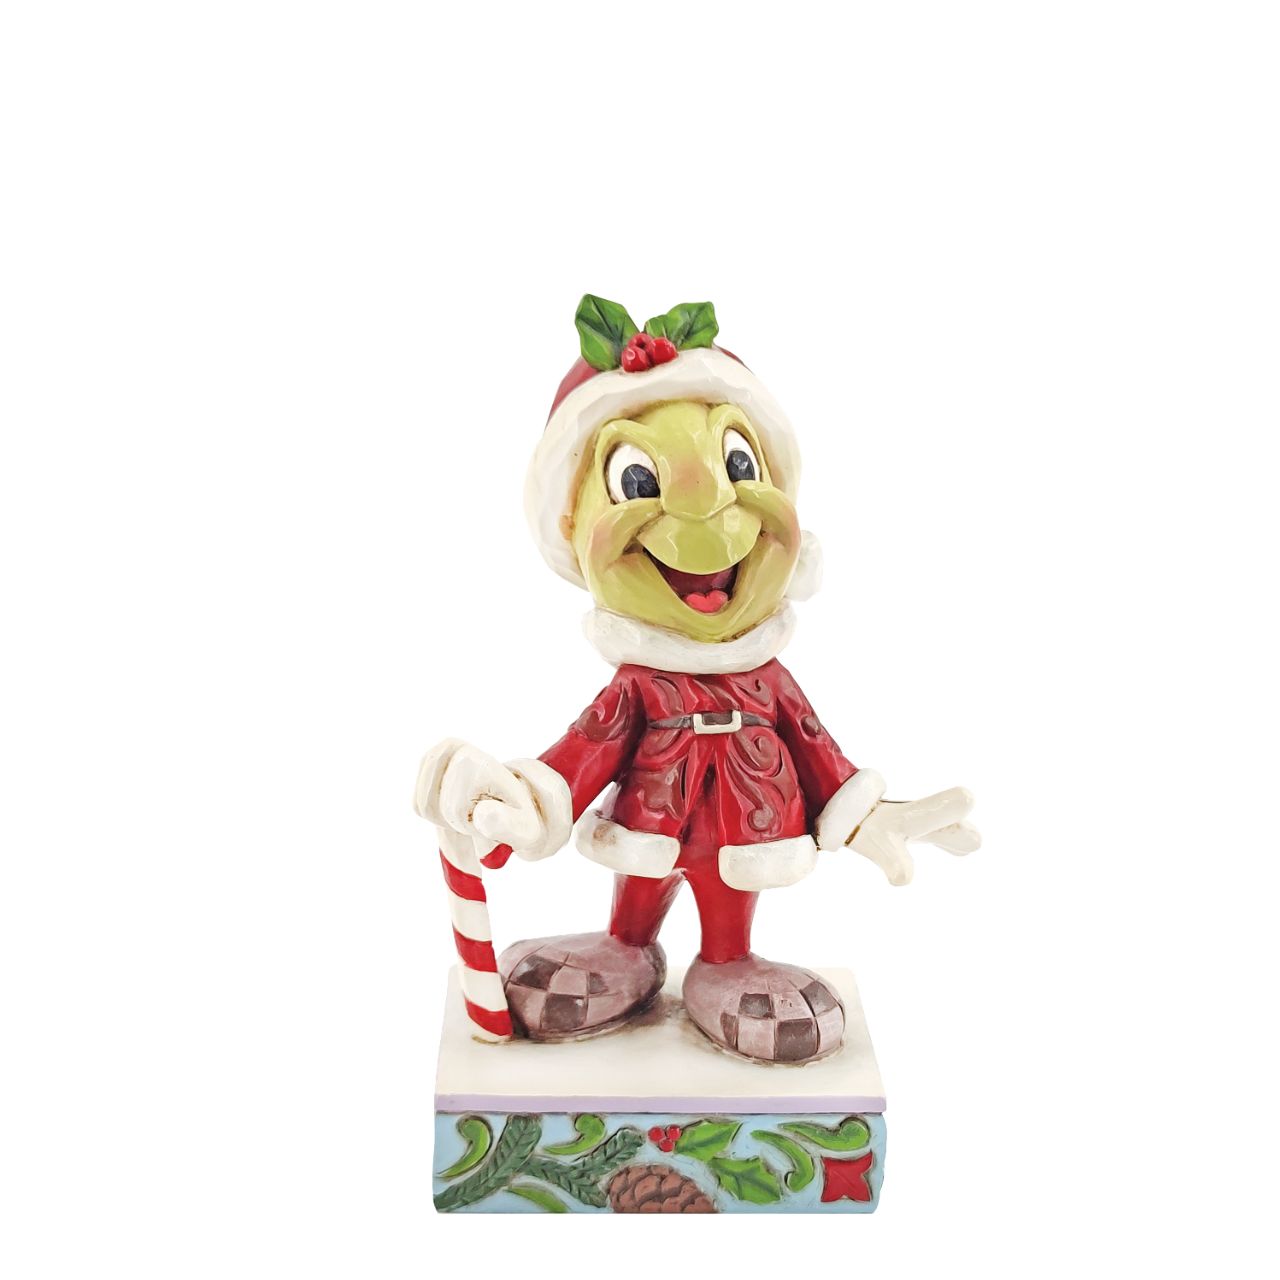 Jim Shore Disney Traditions Christmas Jiminy Cricket Figurine  Be Wise and Be Merry  This year, Jiminy Cricket lets Christmas be his guide. Donning Santa's coat and boots the charming little insect hopes to turn all your wishes true this season. Walking with a candy cane, the cricket smiles brightly in this Jim Shore classic.